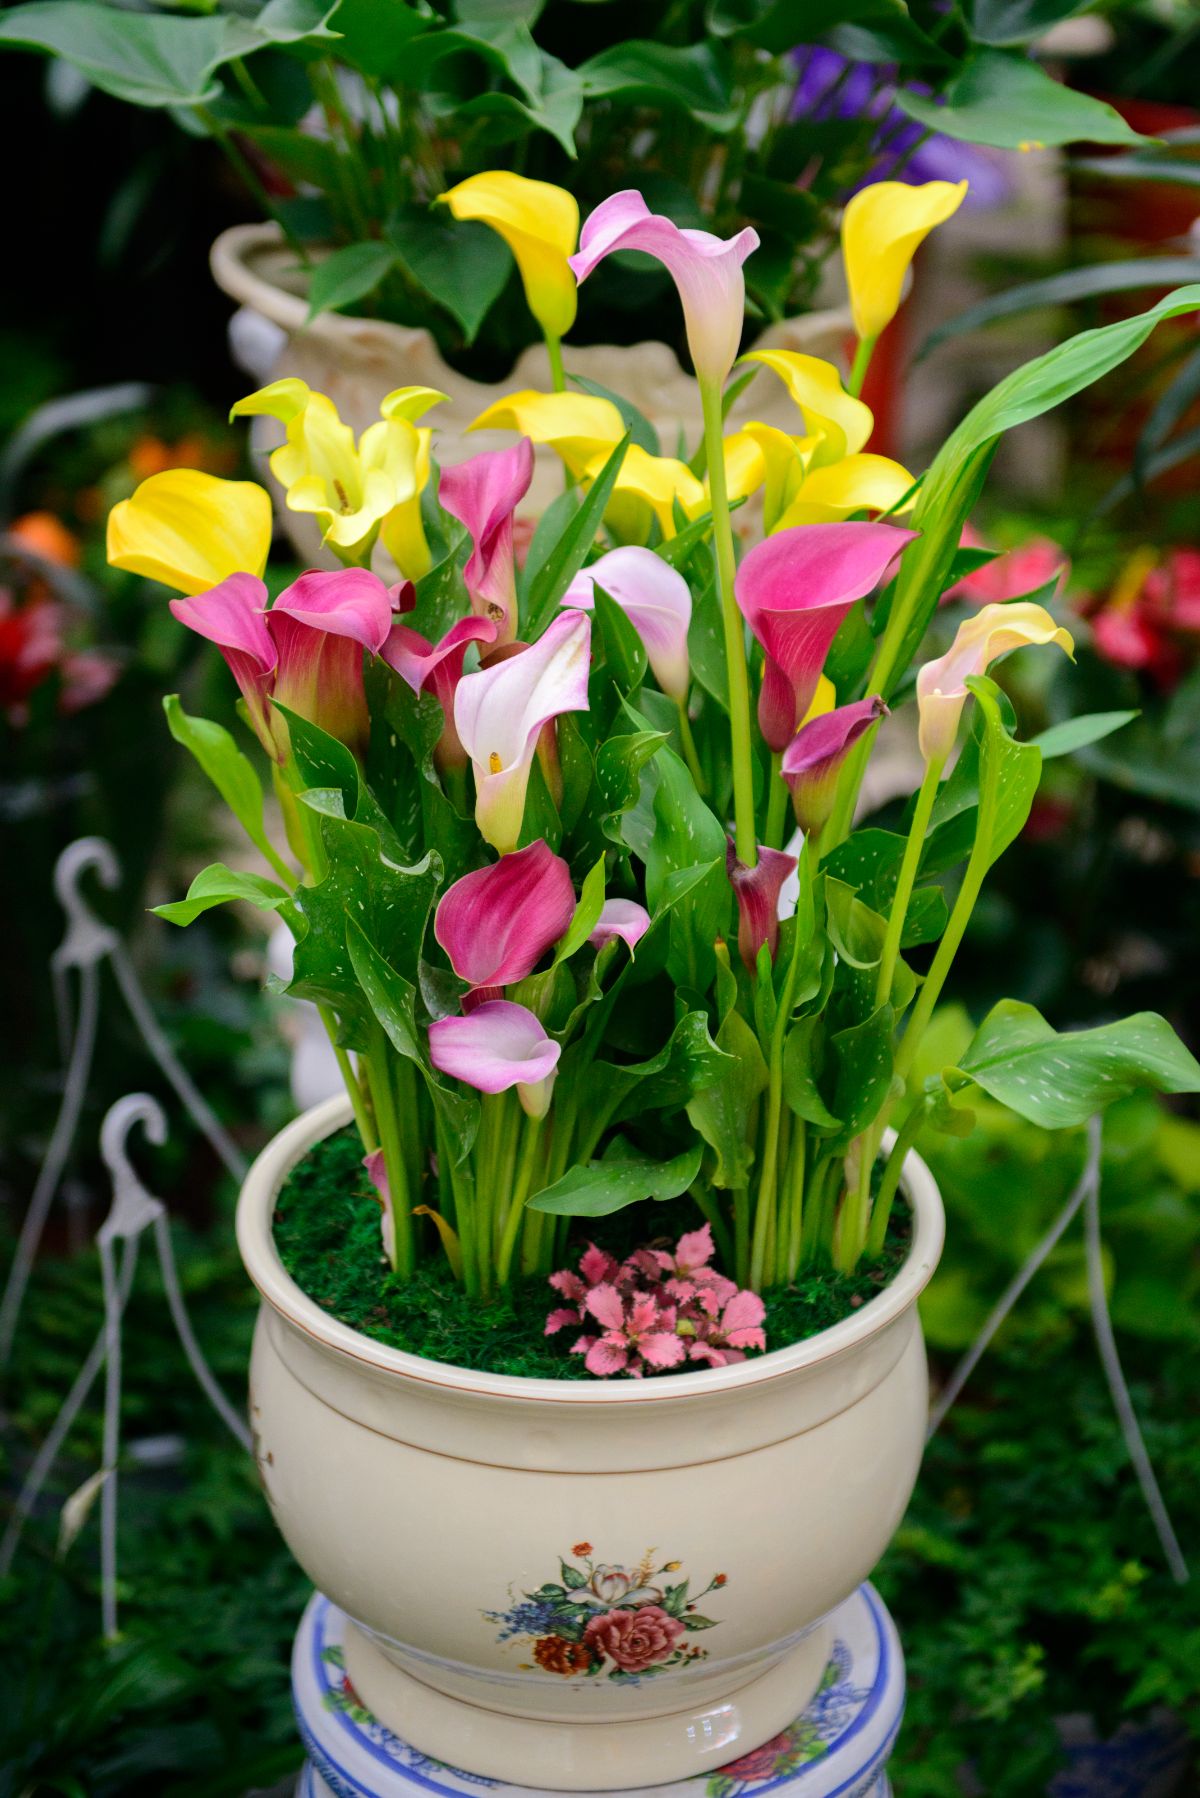 A planter of potted yellow and pink calla lilies